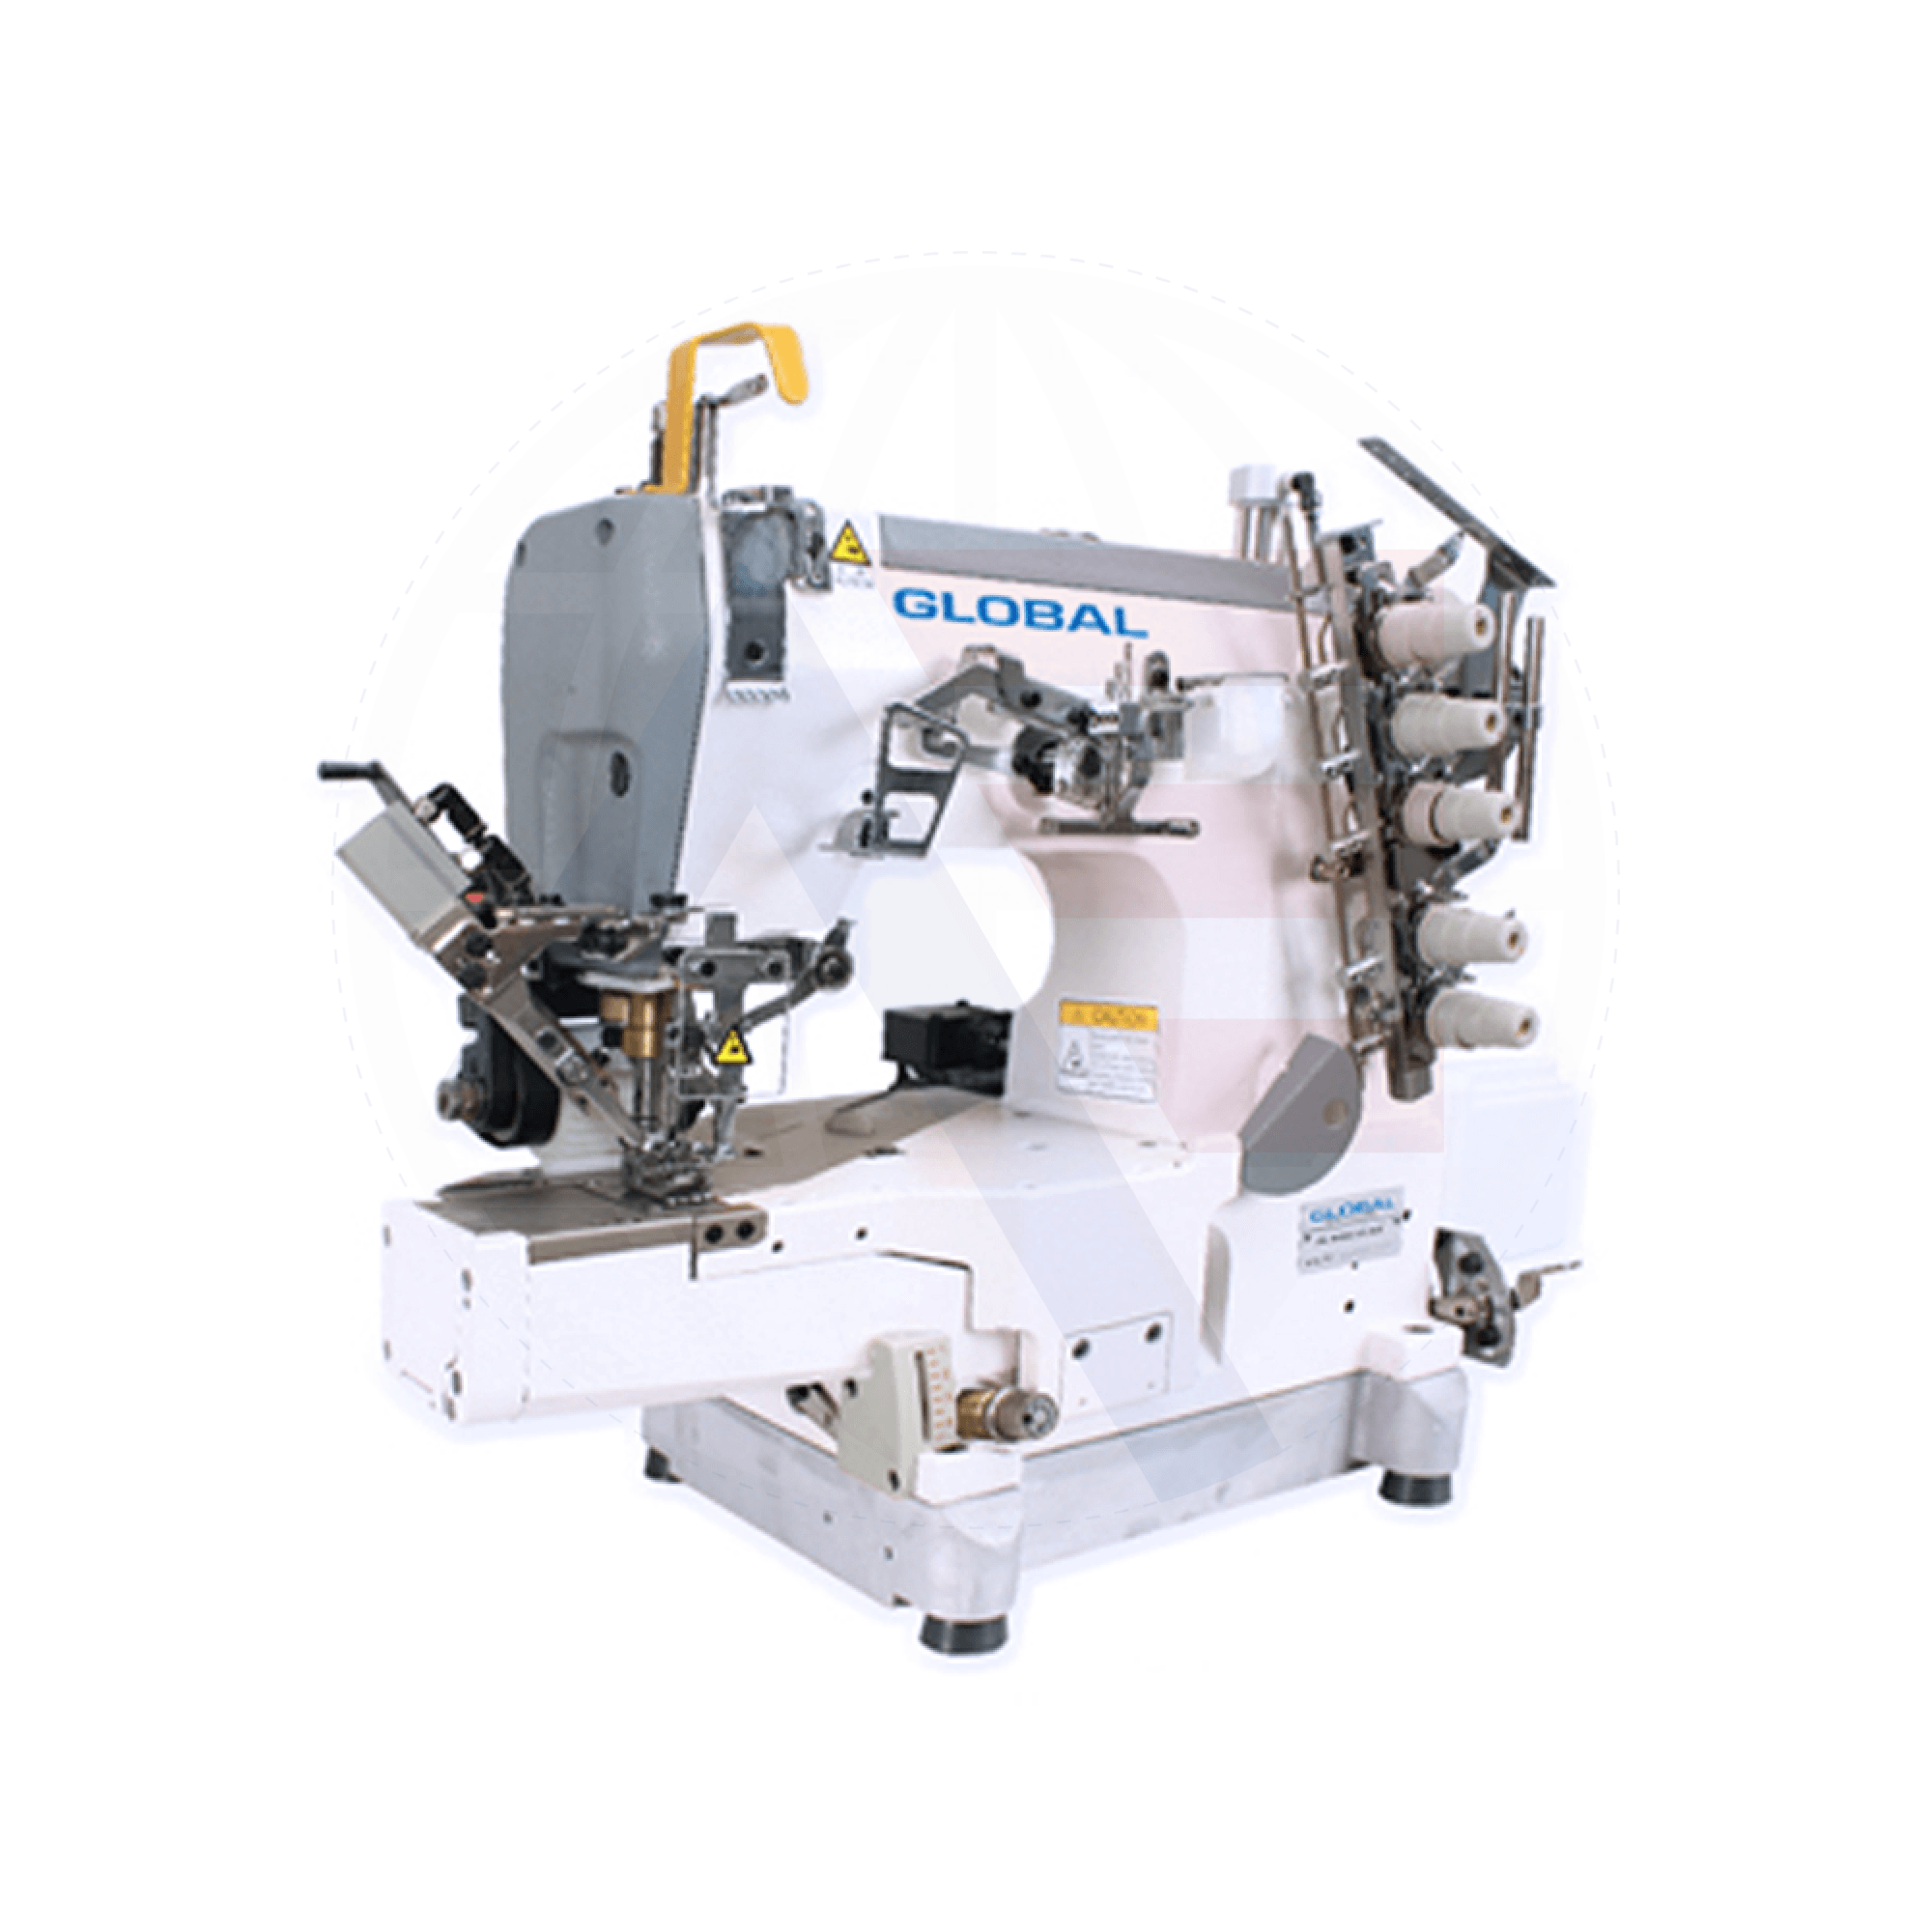 Global Cb 3700 Series Cylinder-Bed Coverstitch Machine Sewing Machines